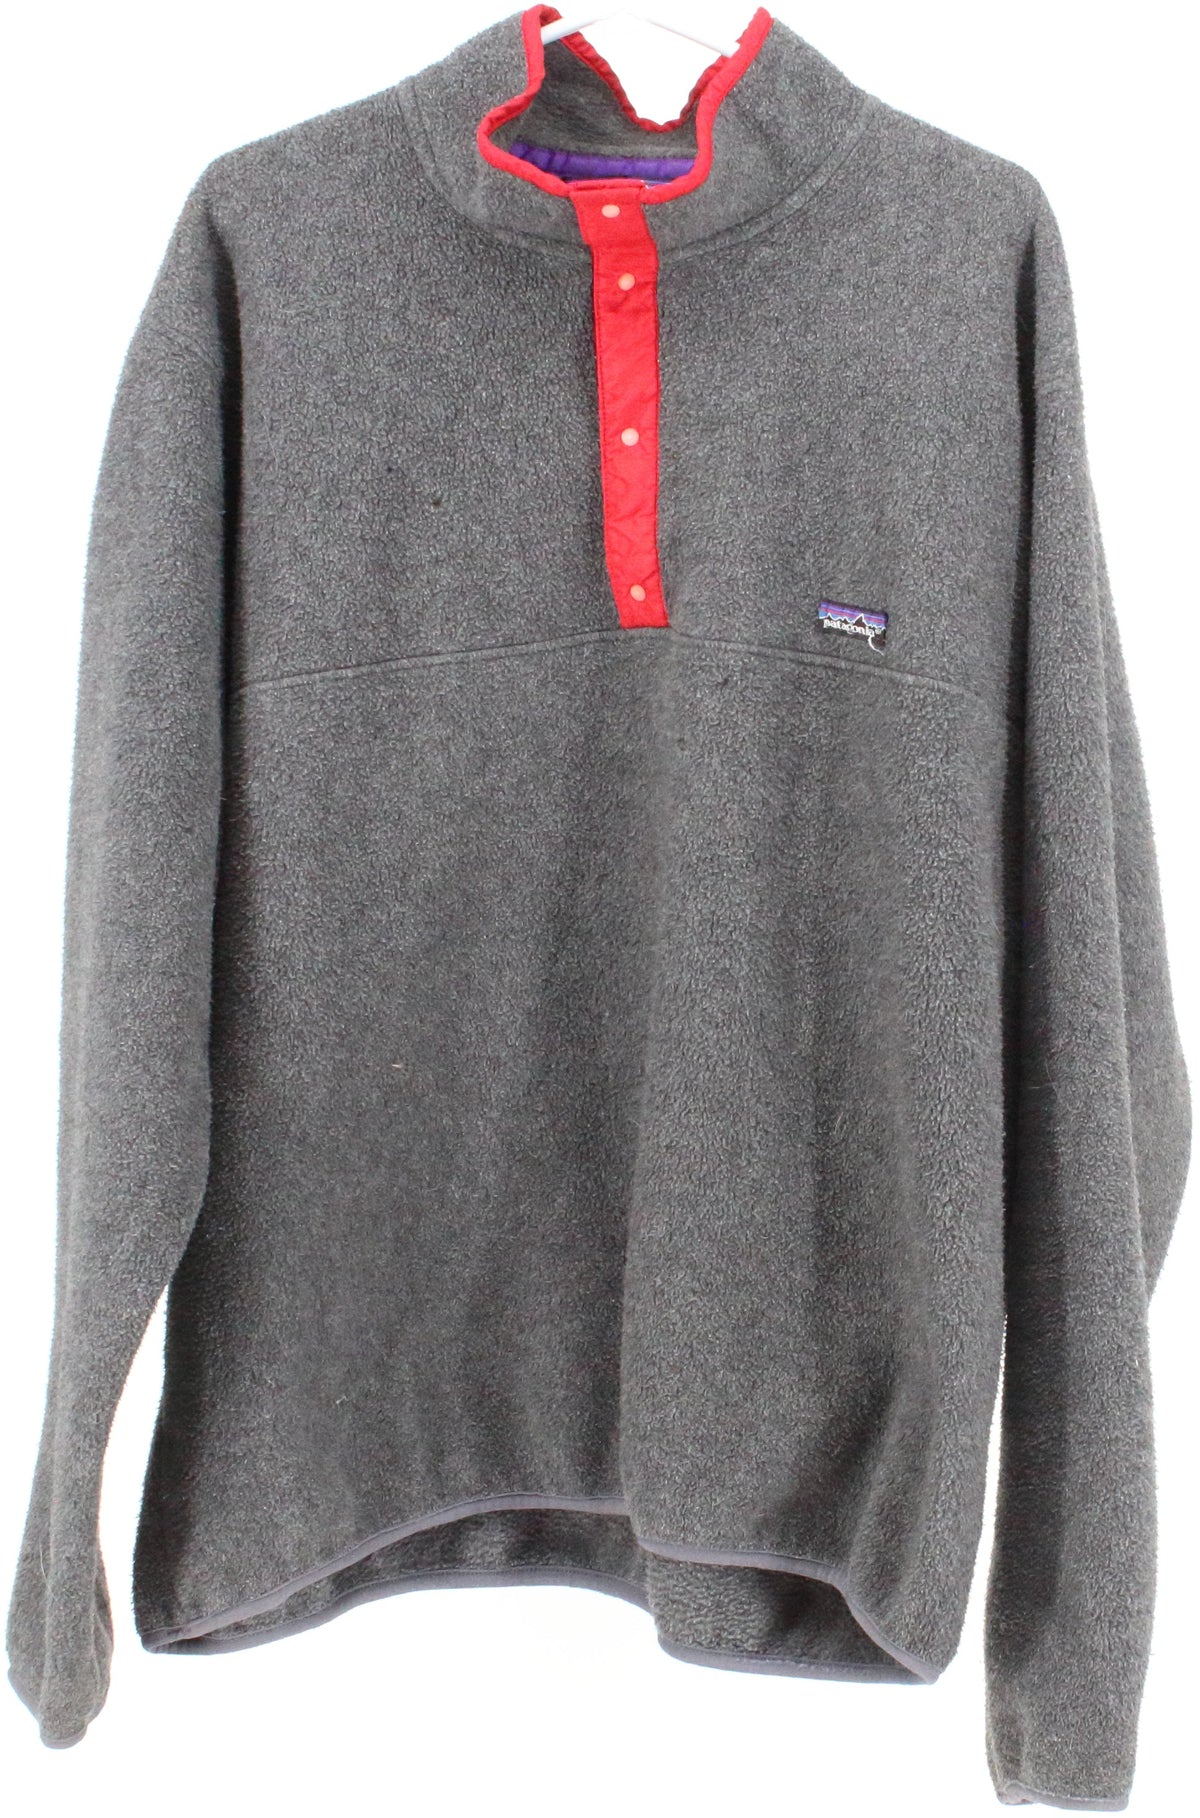 Patagonia Dark Grey and Red Buttons Fleece